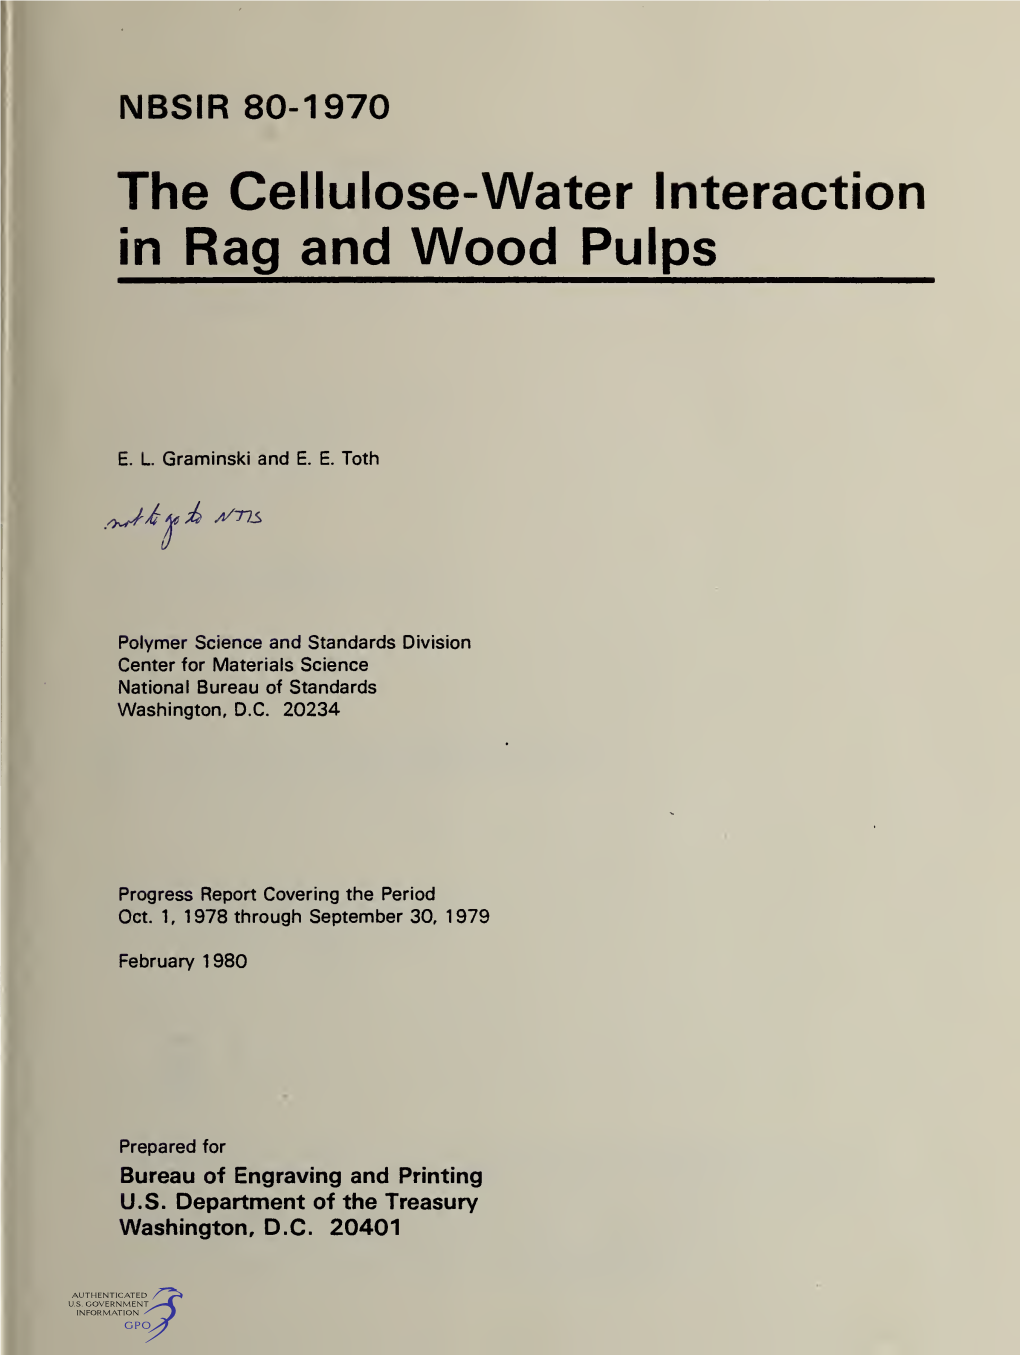 The Cellulose-Water Interaction in Rag and Wood Pulps